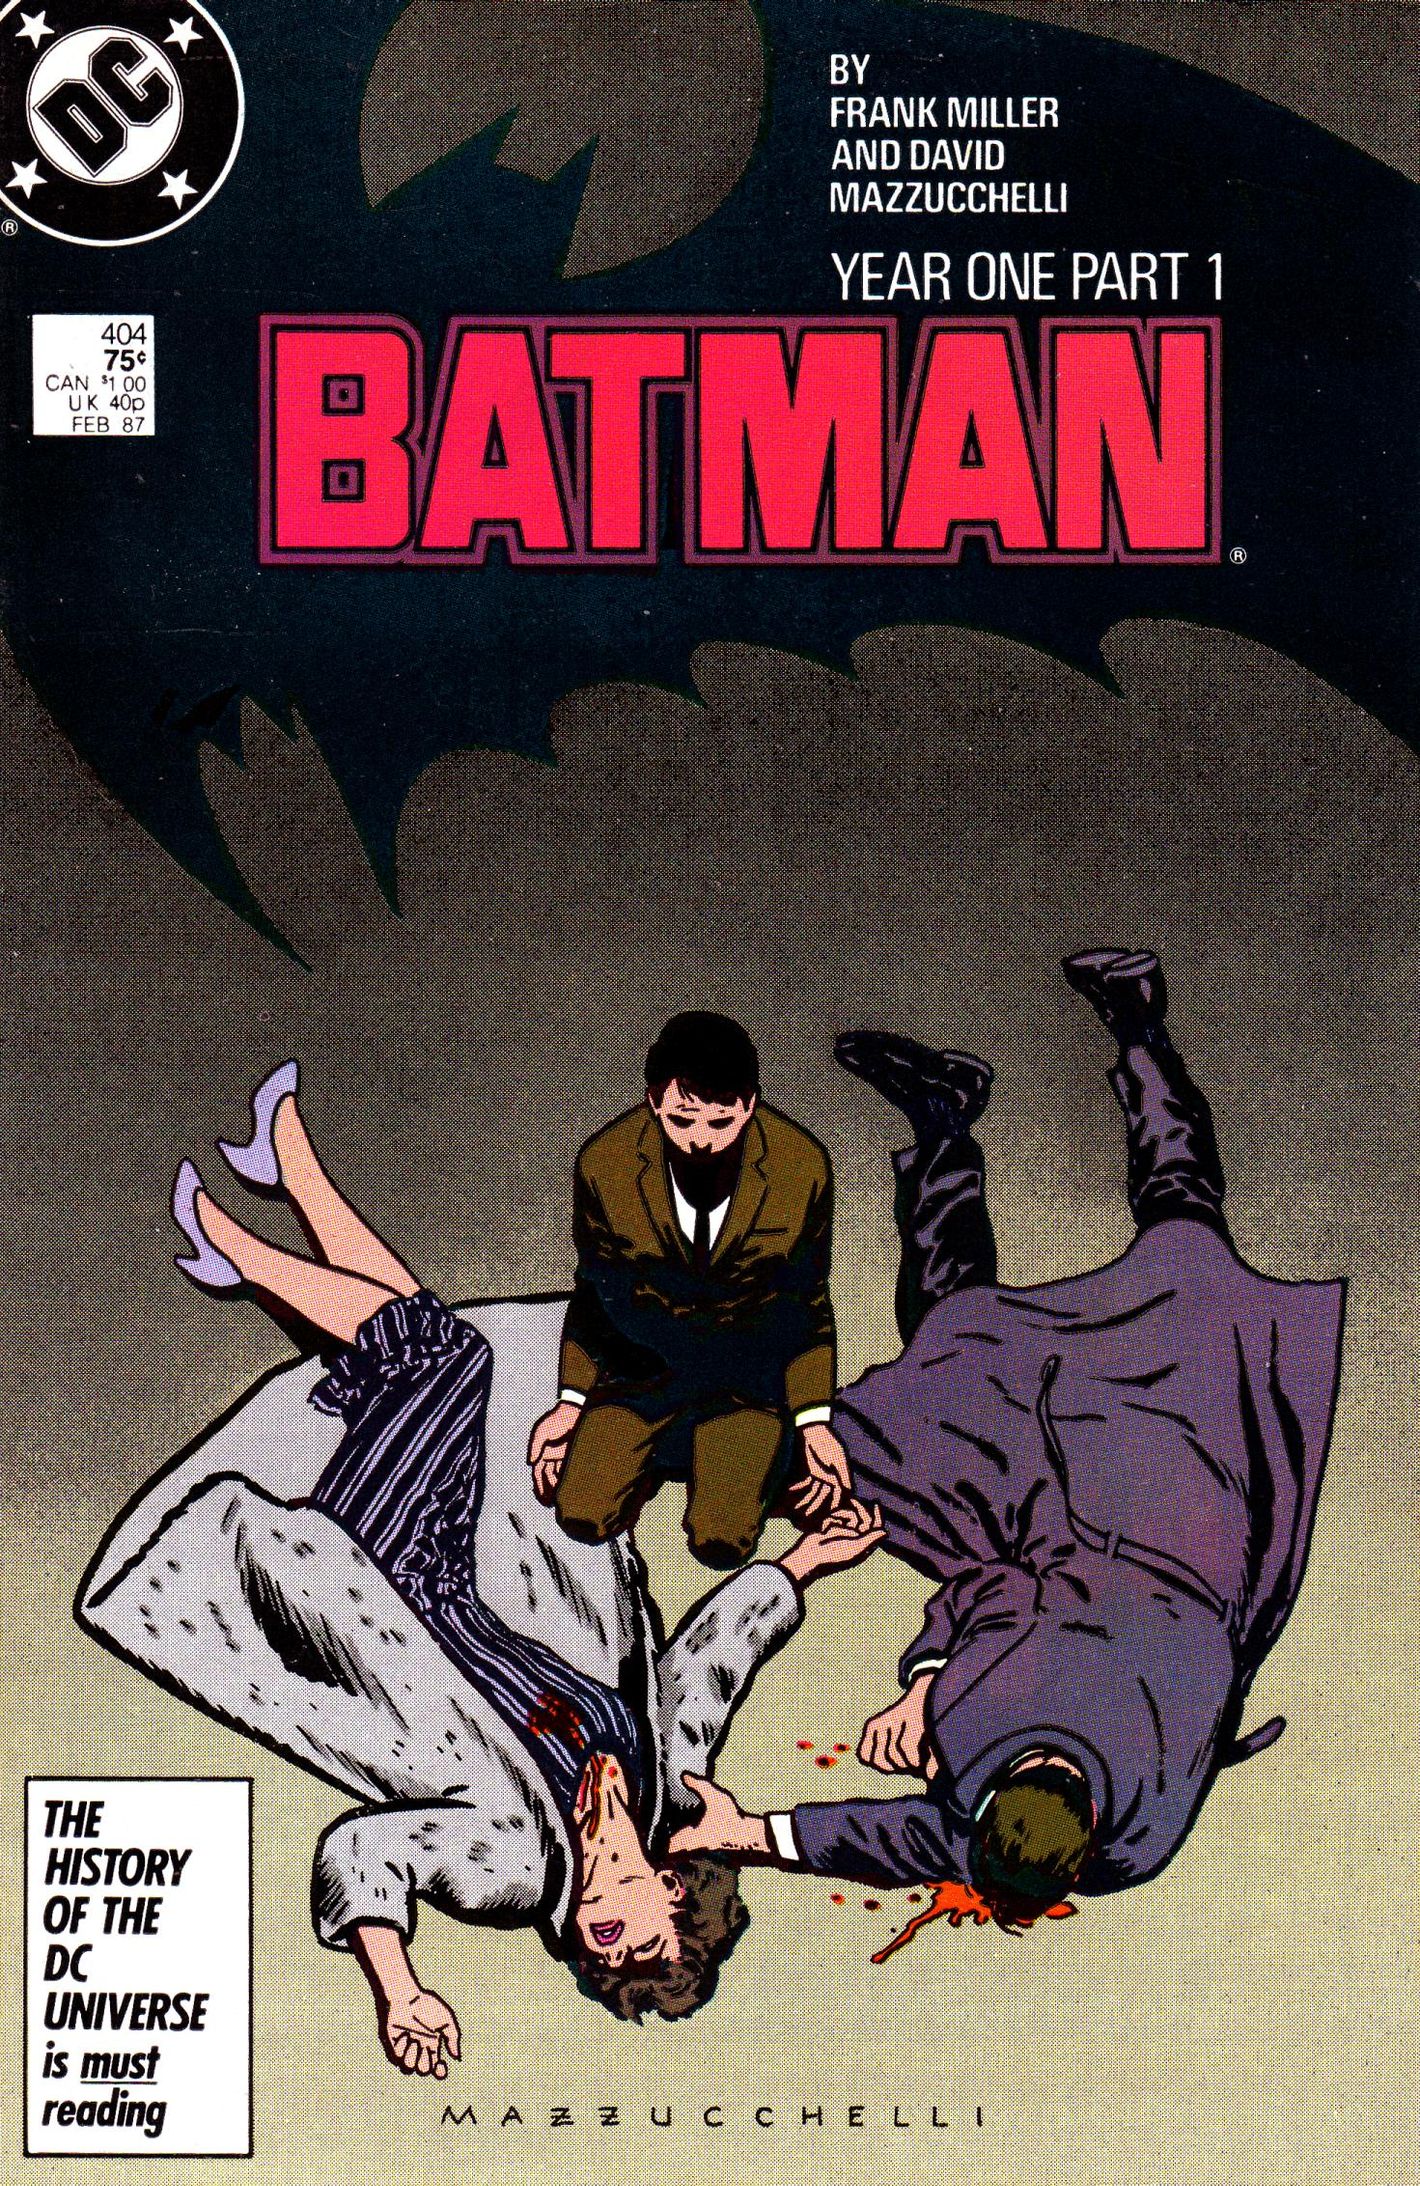 The Batman Chronicles 1995 Issue 20, Read The Batman Chronicles 1995 Issue  20 comic online in high quality. Read Full Comic online for free - Read  comics online in high quality .